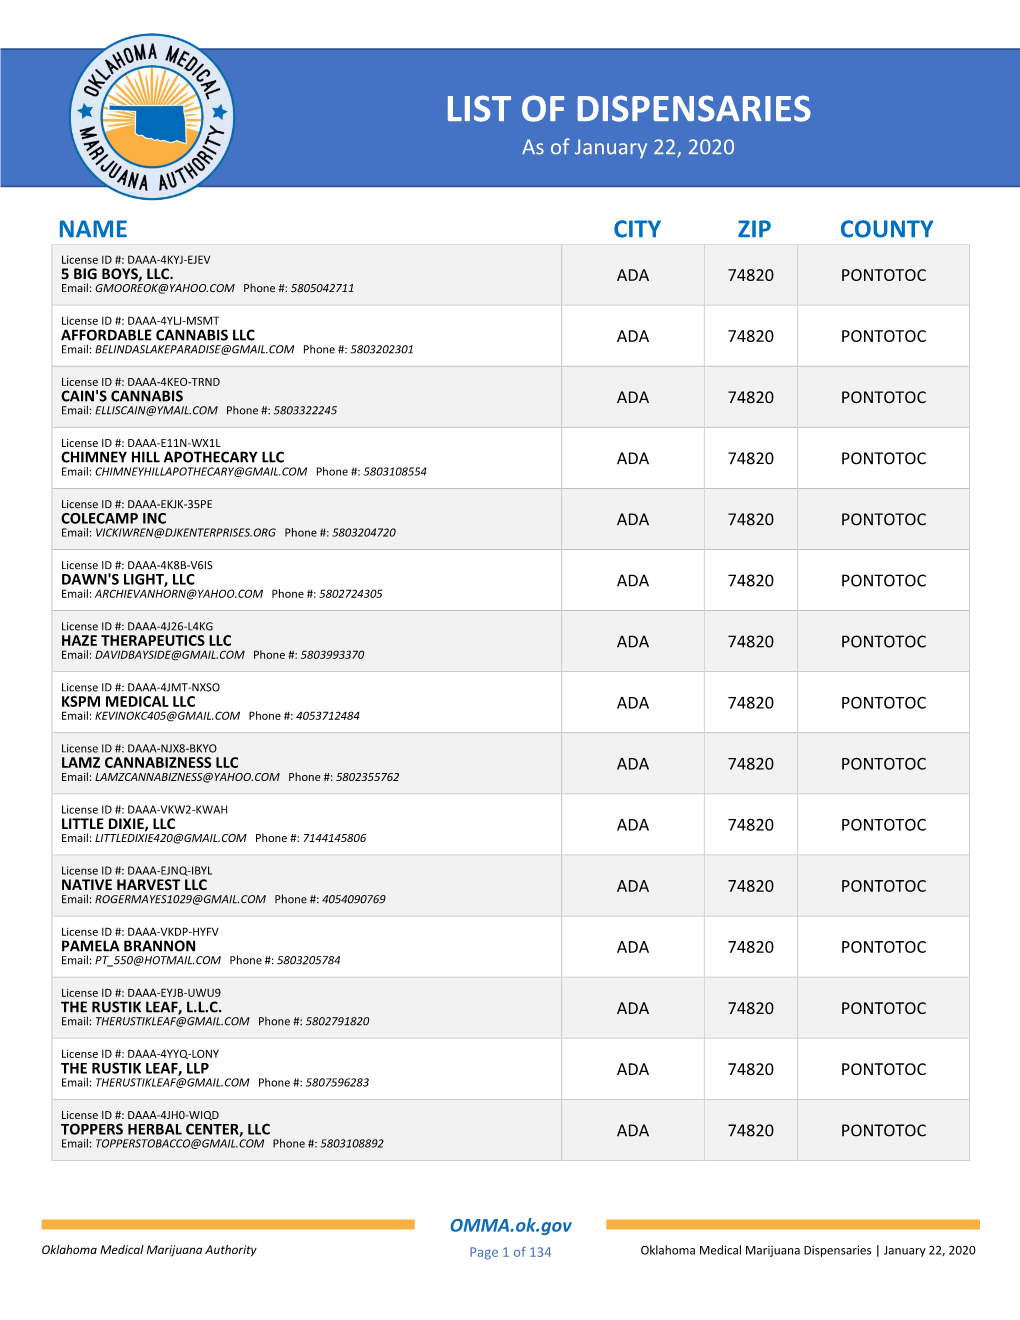 LIST of DISPENSARIES As of January 22, 2020